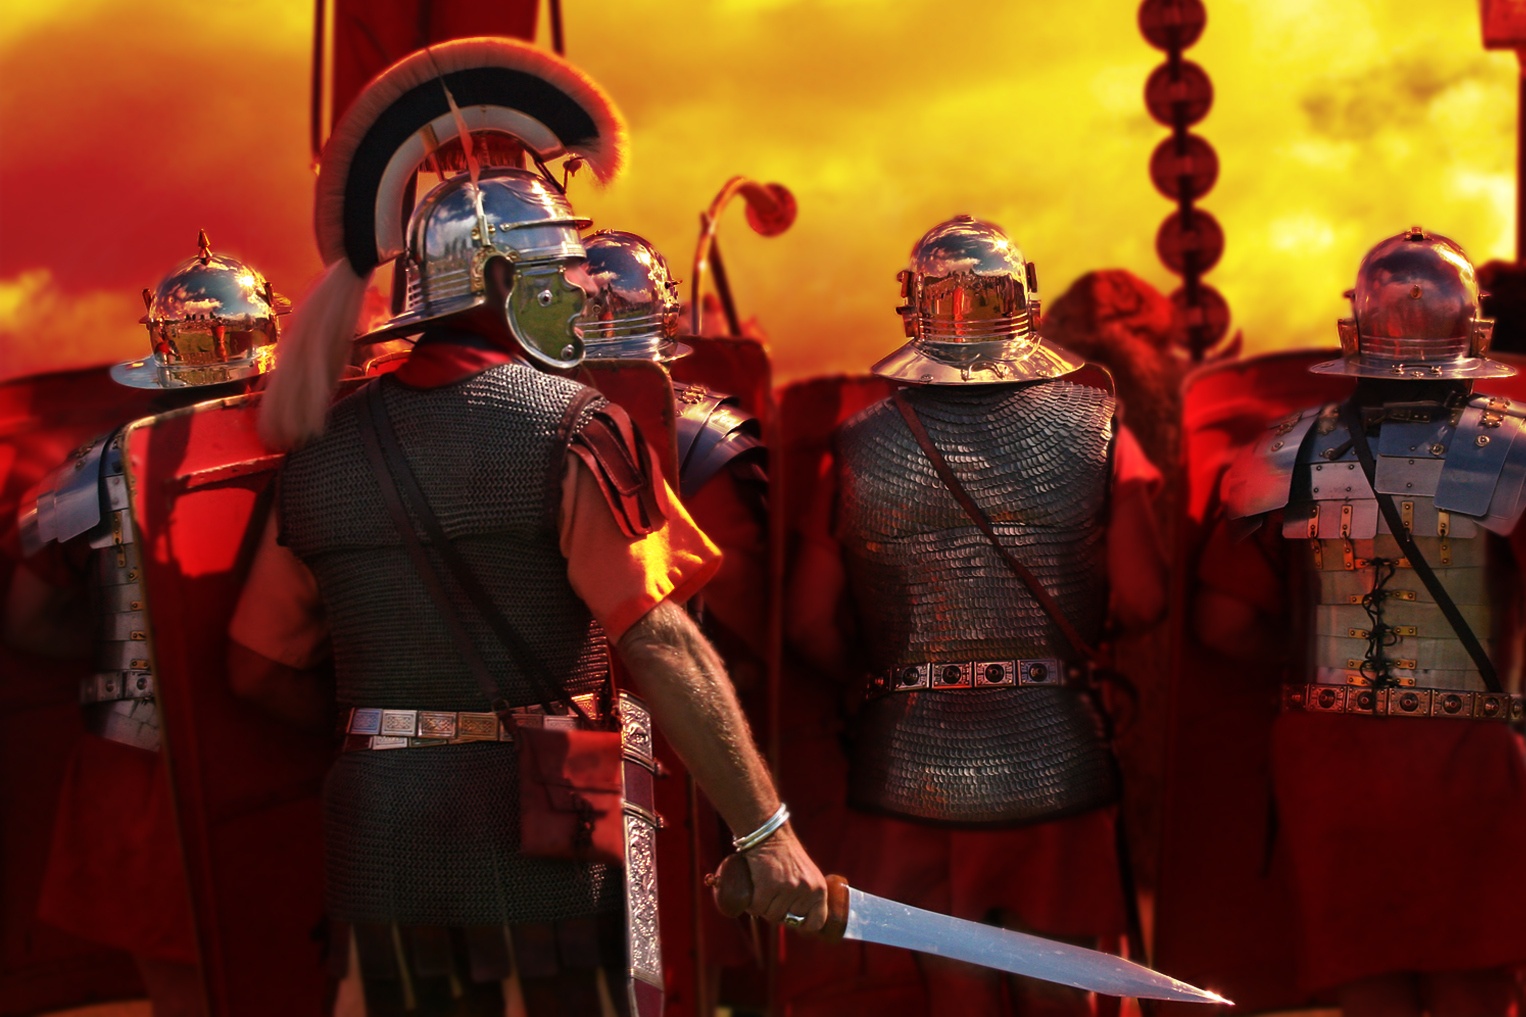 A Roman centurion and his troops